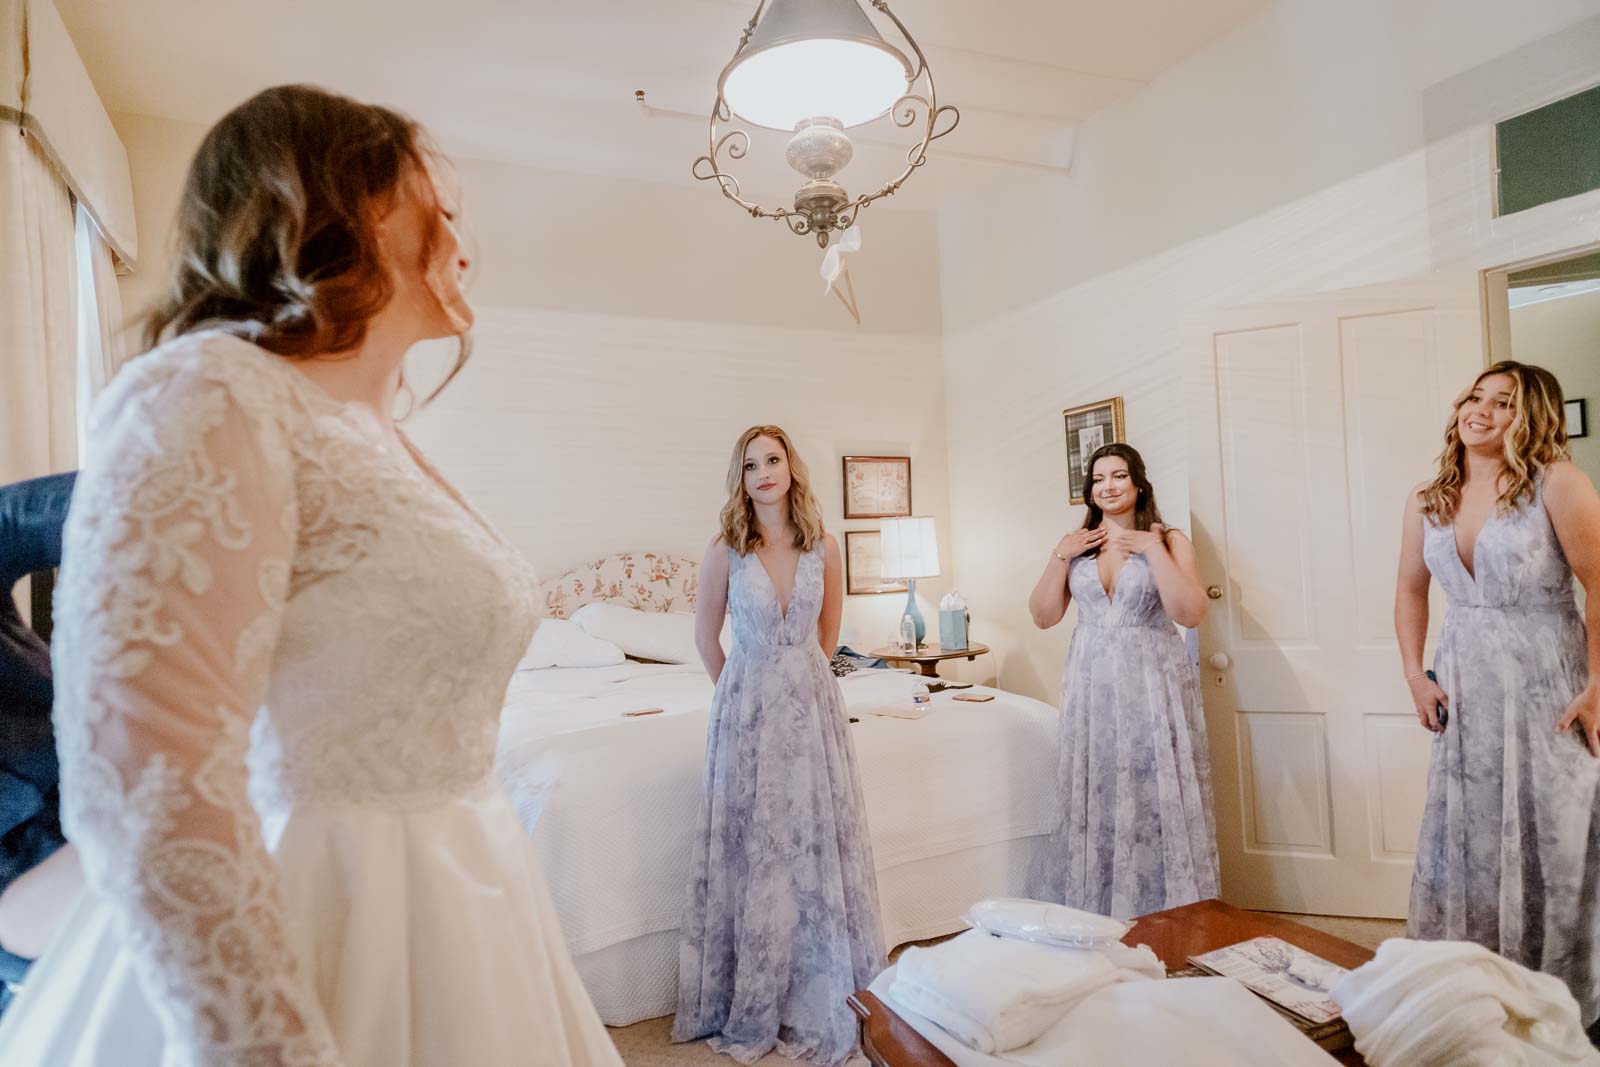 The bridesmaids reaction to seeing the bride and her dress the first time